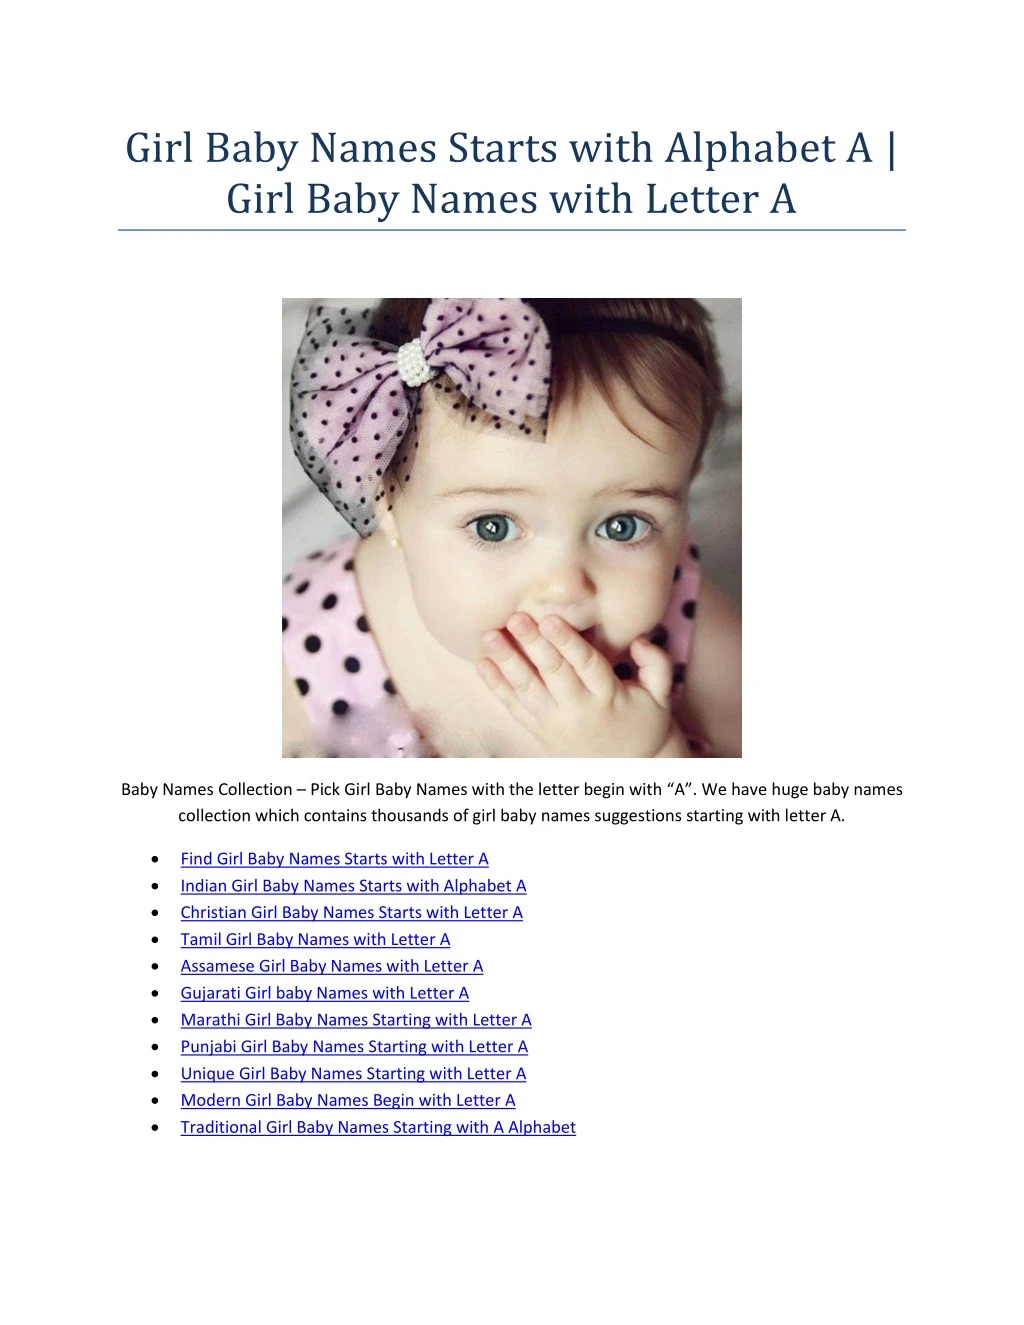 girl baby names starts with alphabet a girl baby